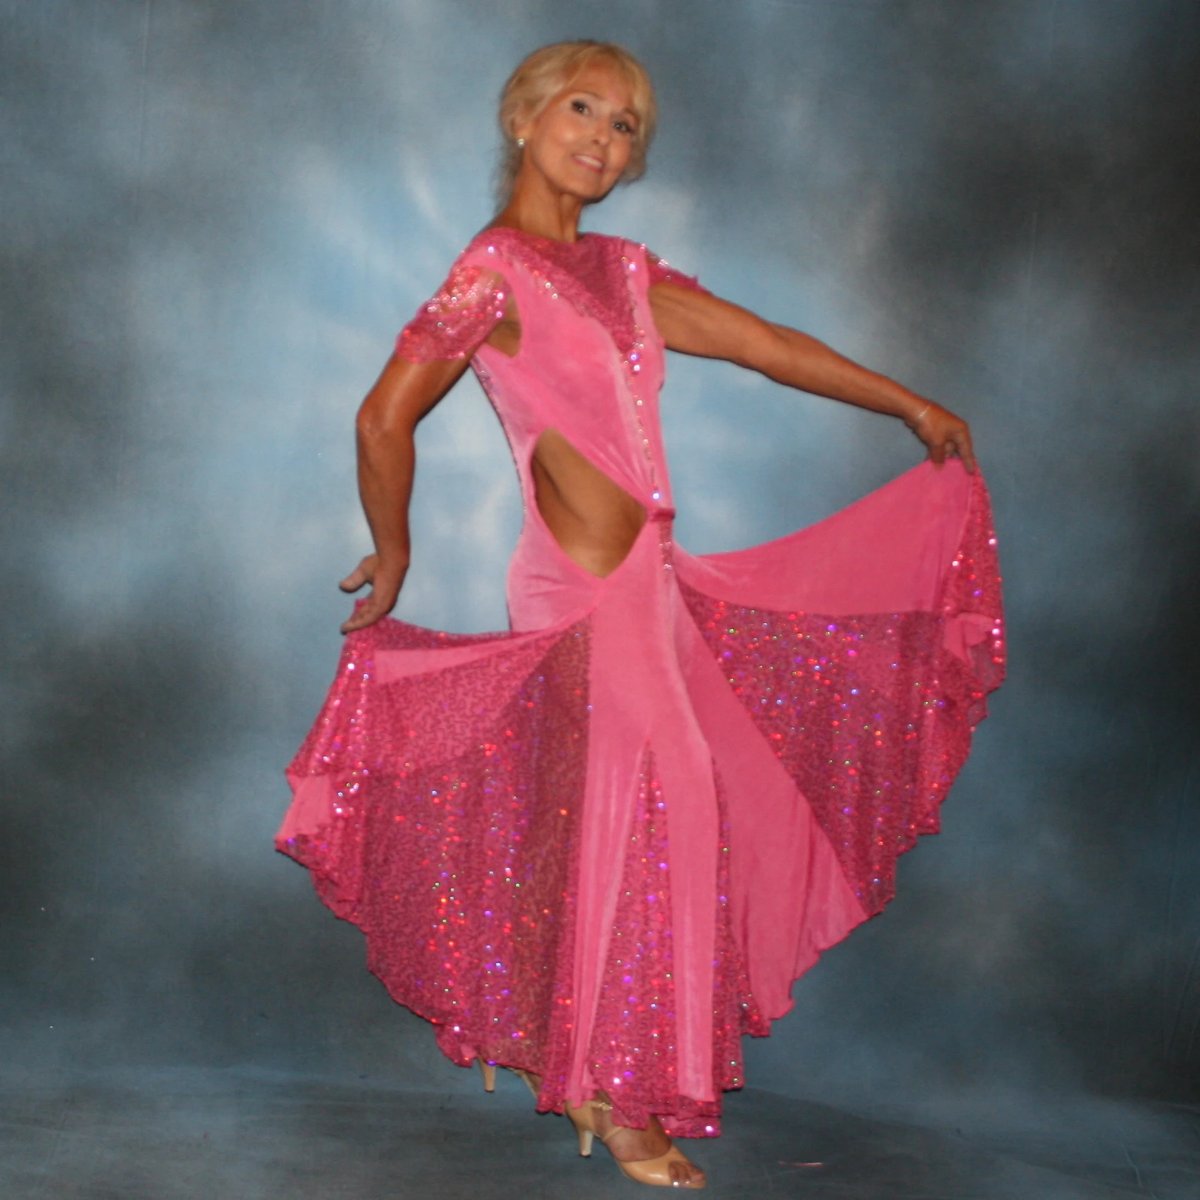 Crystal's Creations side view of Pink ballroom dress was created of luxurious bubble gum pink solid slinky with yards & yards of delicate deep pink sequin insets & is embellished with CAB & rose Swarovski detailed rhinestone work